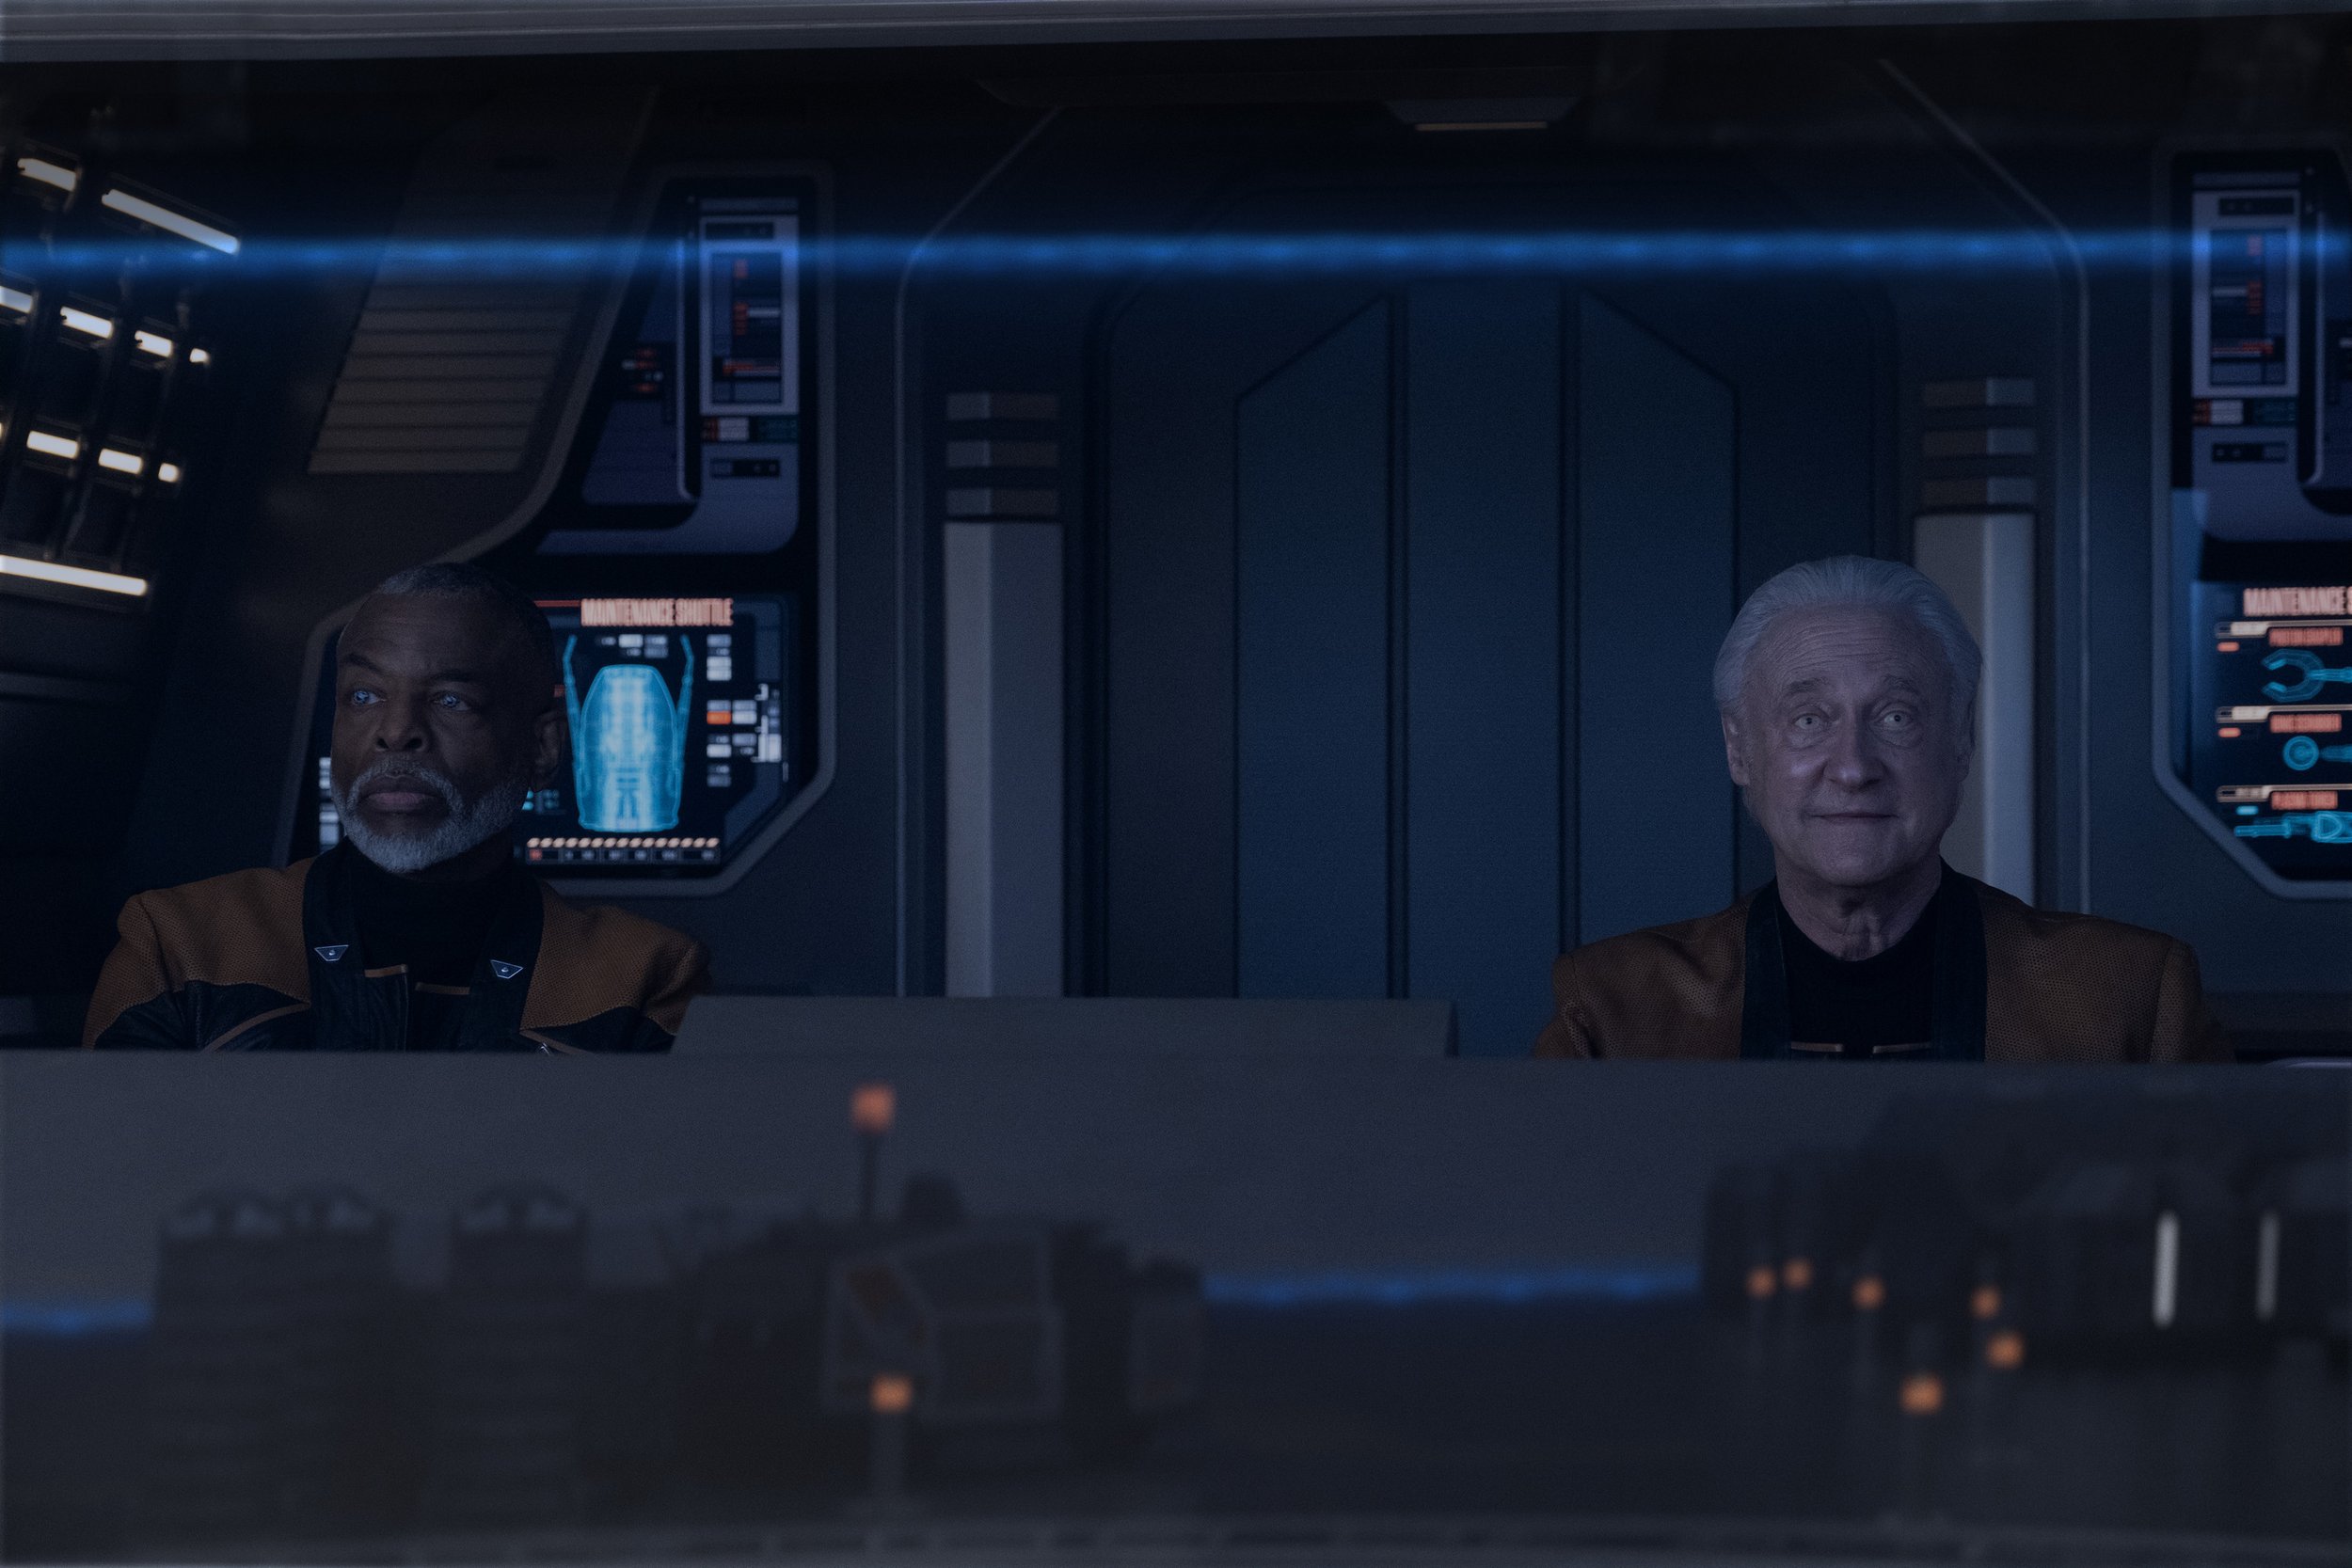   LeVar Burton  as Geordi La Forge and  Brent Spiner  as Data.  Photo Credit: Trae Patton/Paramount+.  